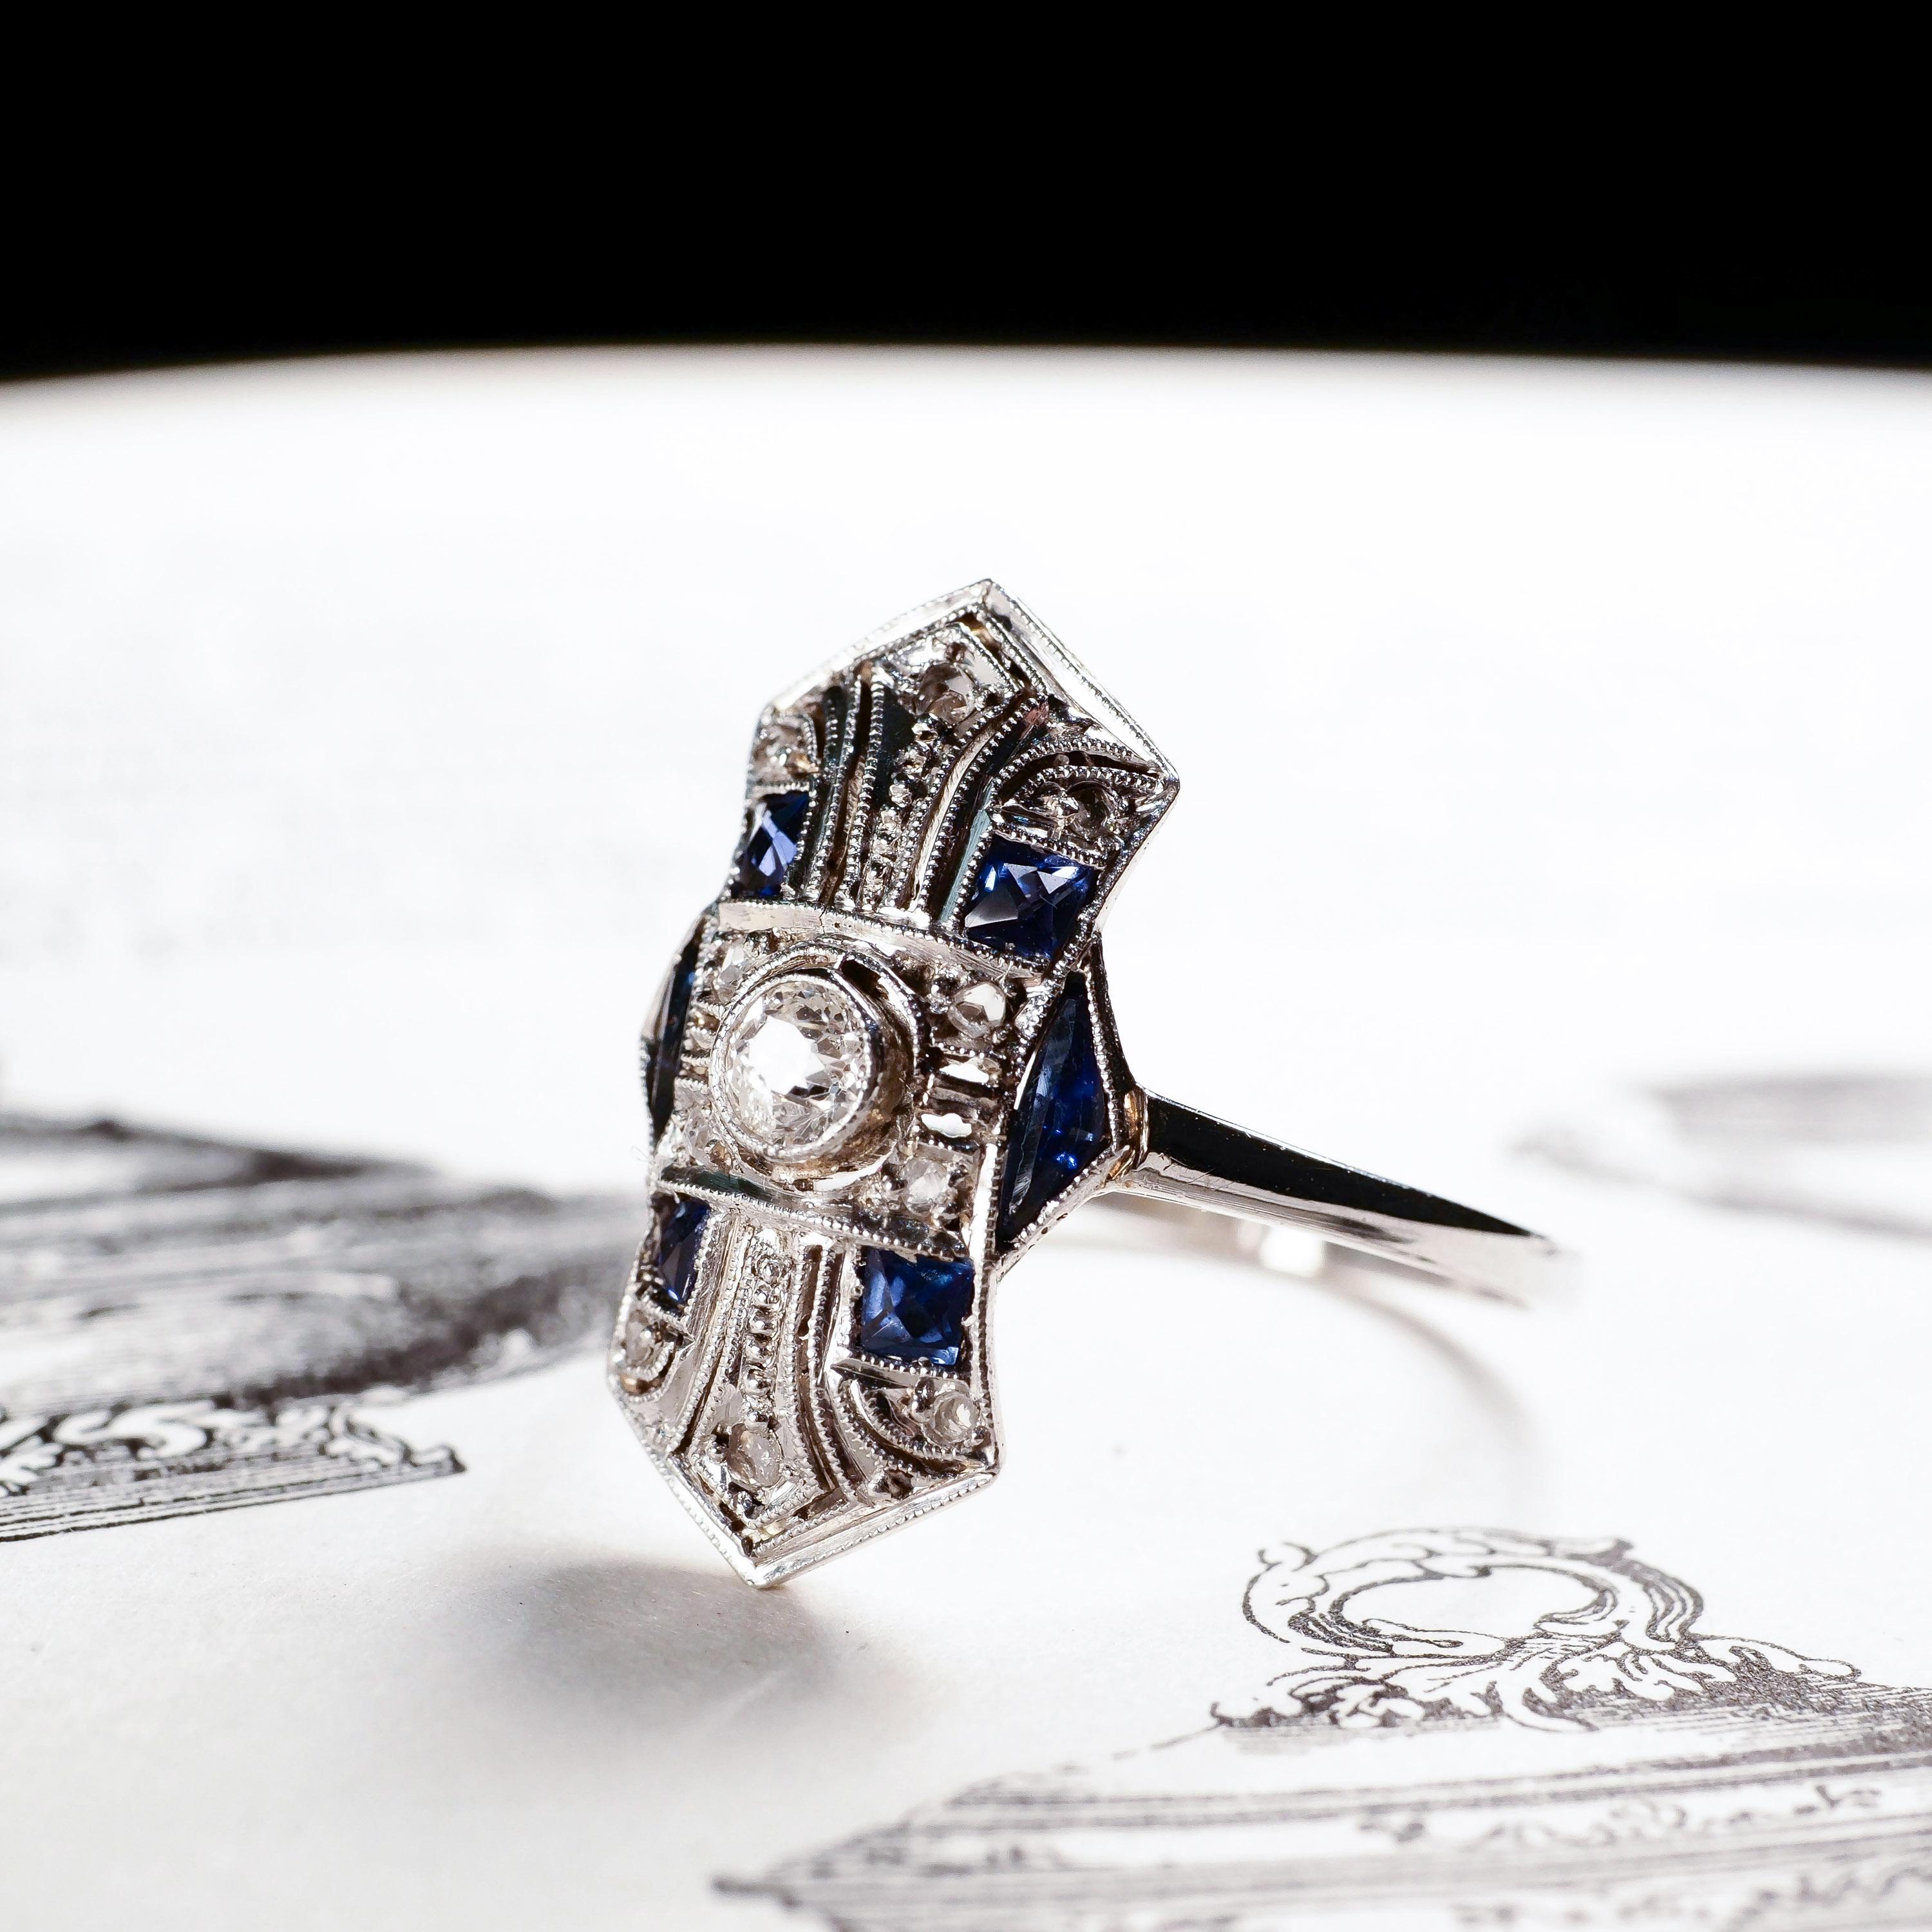 We are delighted to offer this stunning antique Art Deco period diamond & sapphire ring.
 
Distinct and distinguished even upon a quick glance, this ring's aesthetic and deco design most certainly stands out from the crowd and presents a remarkable